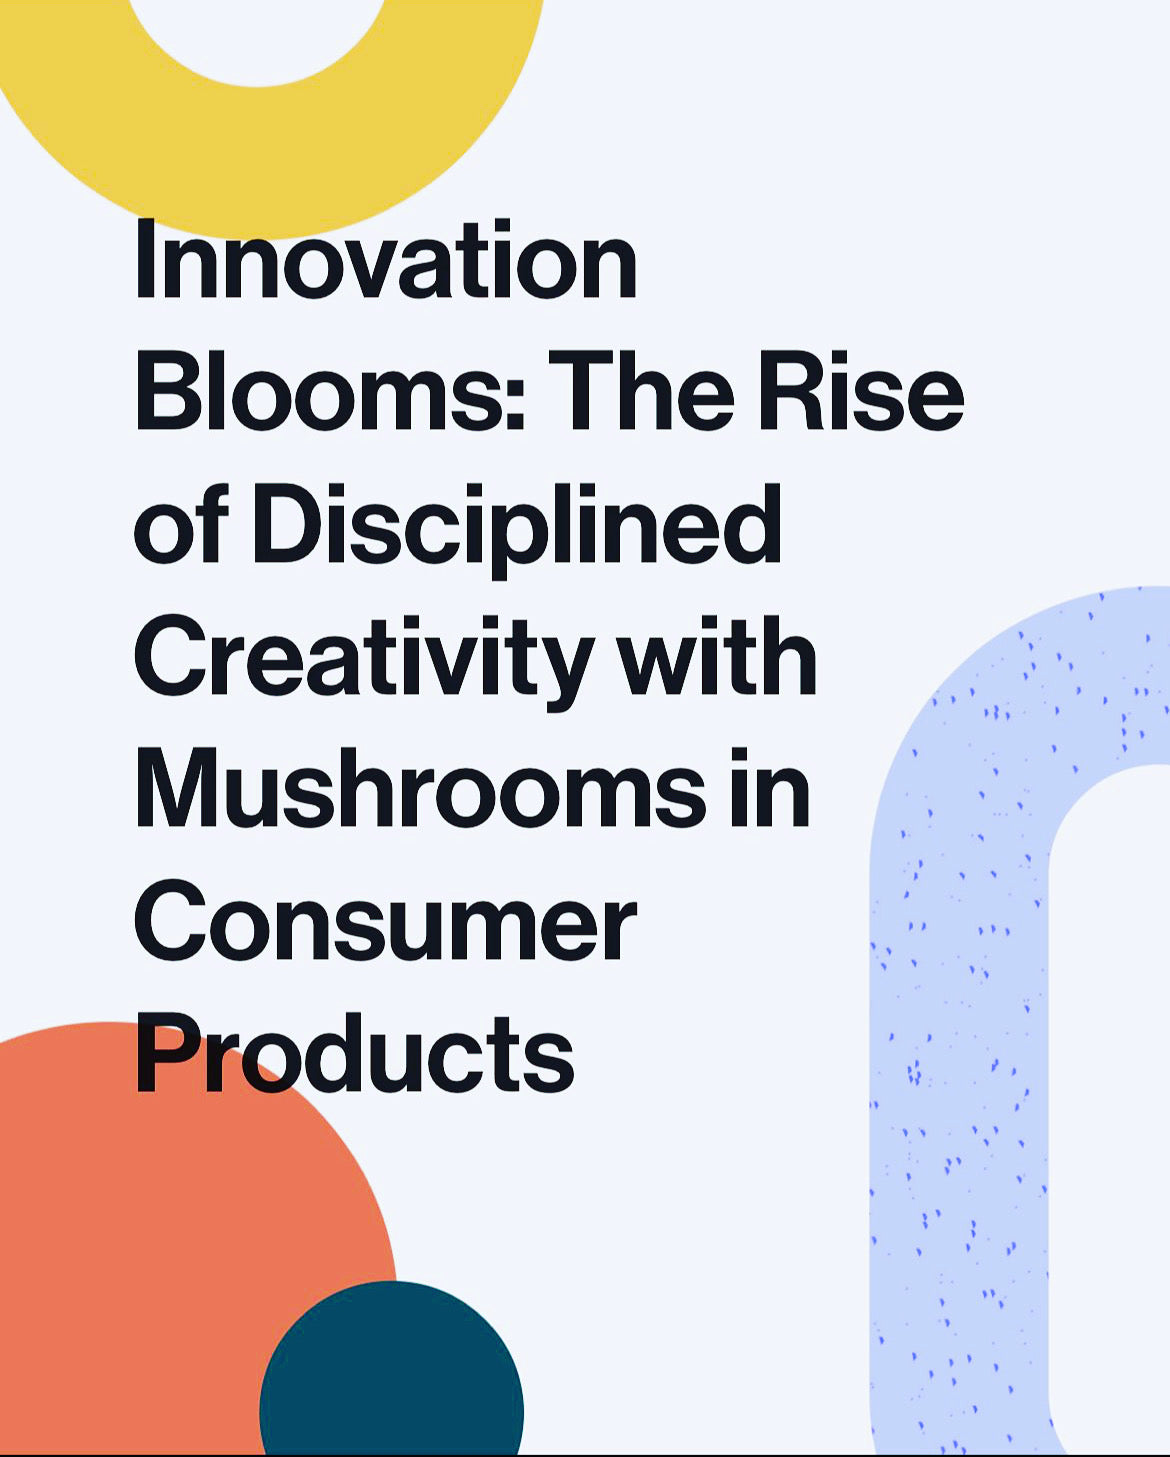 Innovation Blooms: The Rise of Disciplined Creativity with Mushrooms in Consumer Products